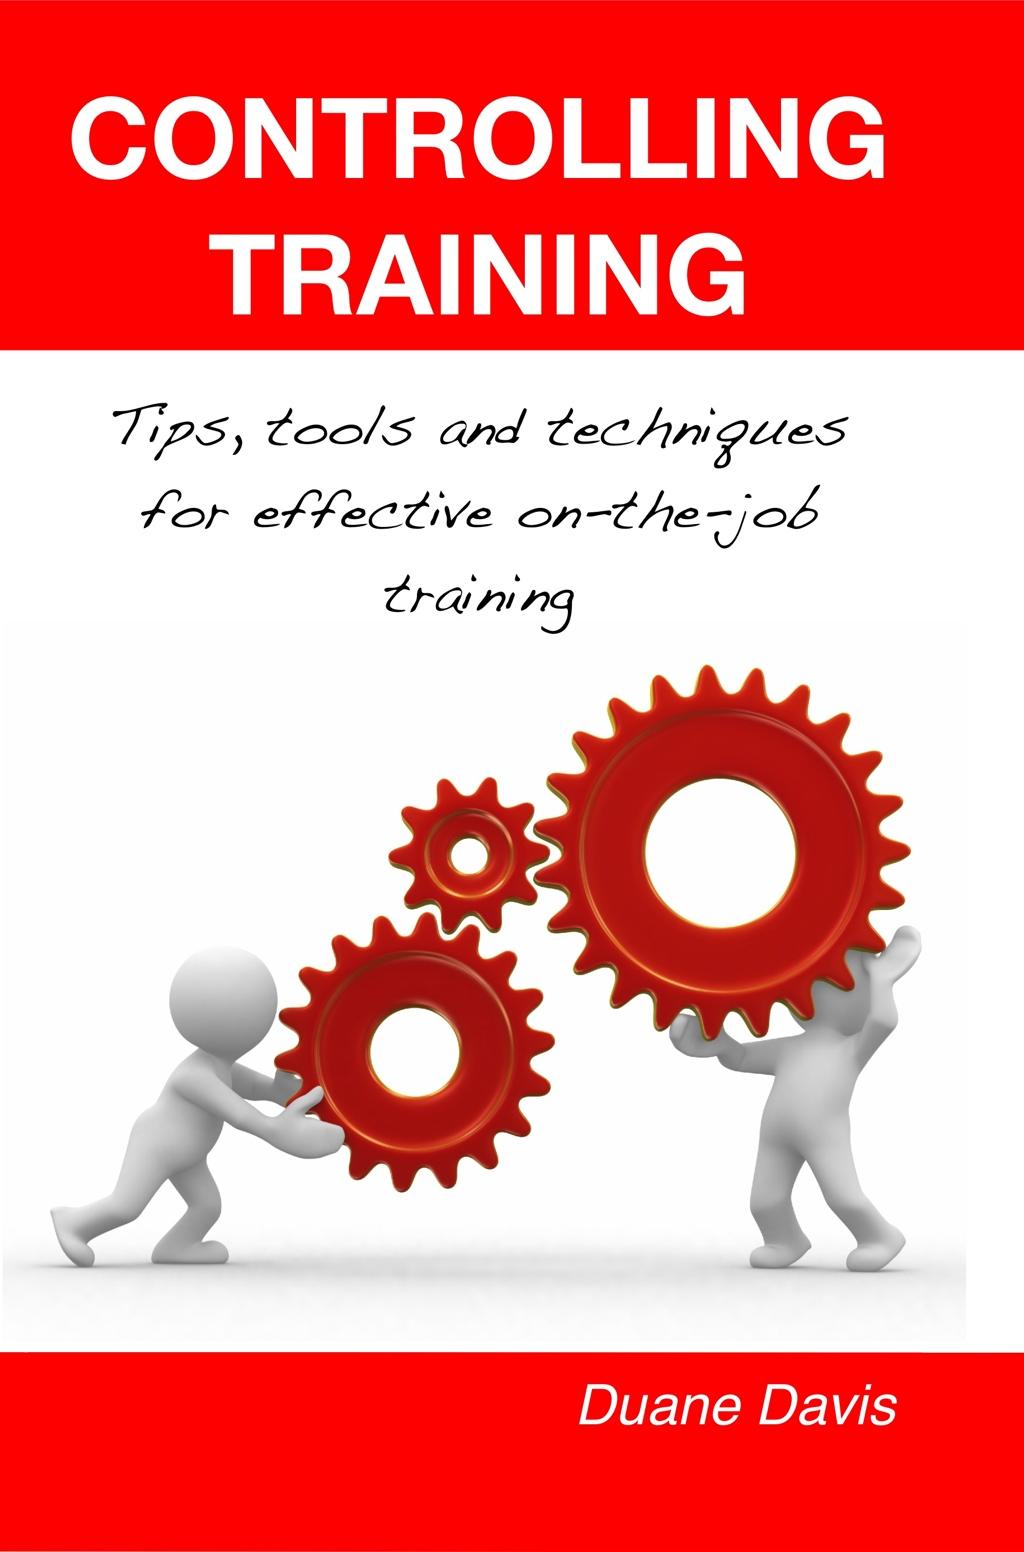 What Now This e-book is taken from the book Controlling Training.